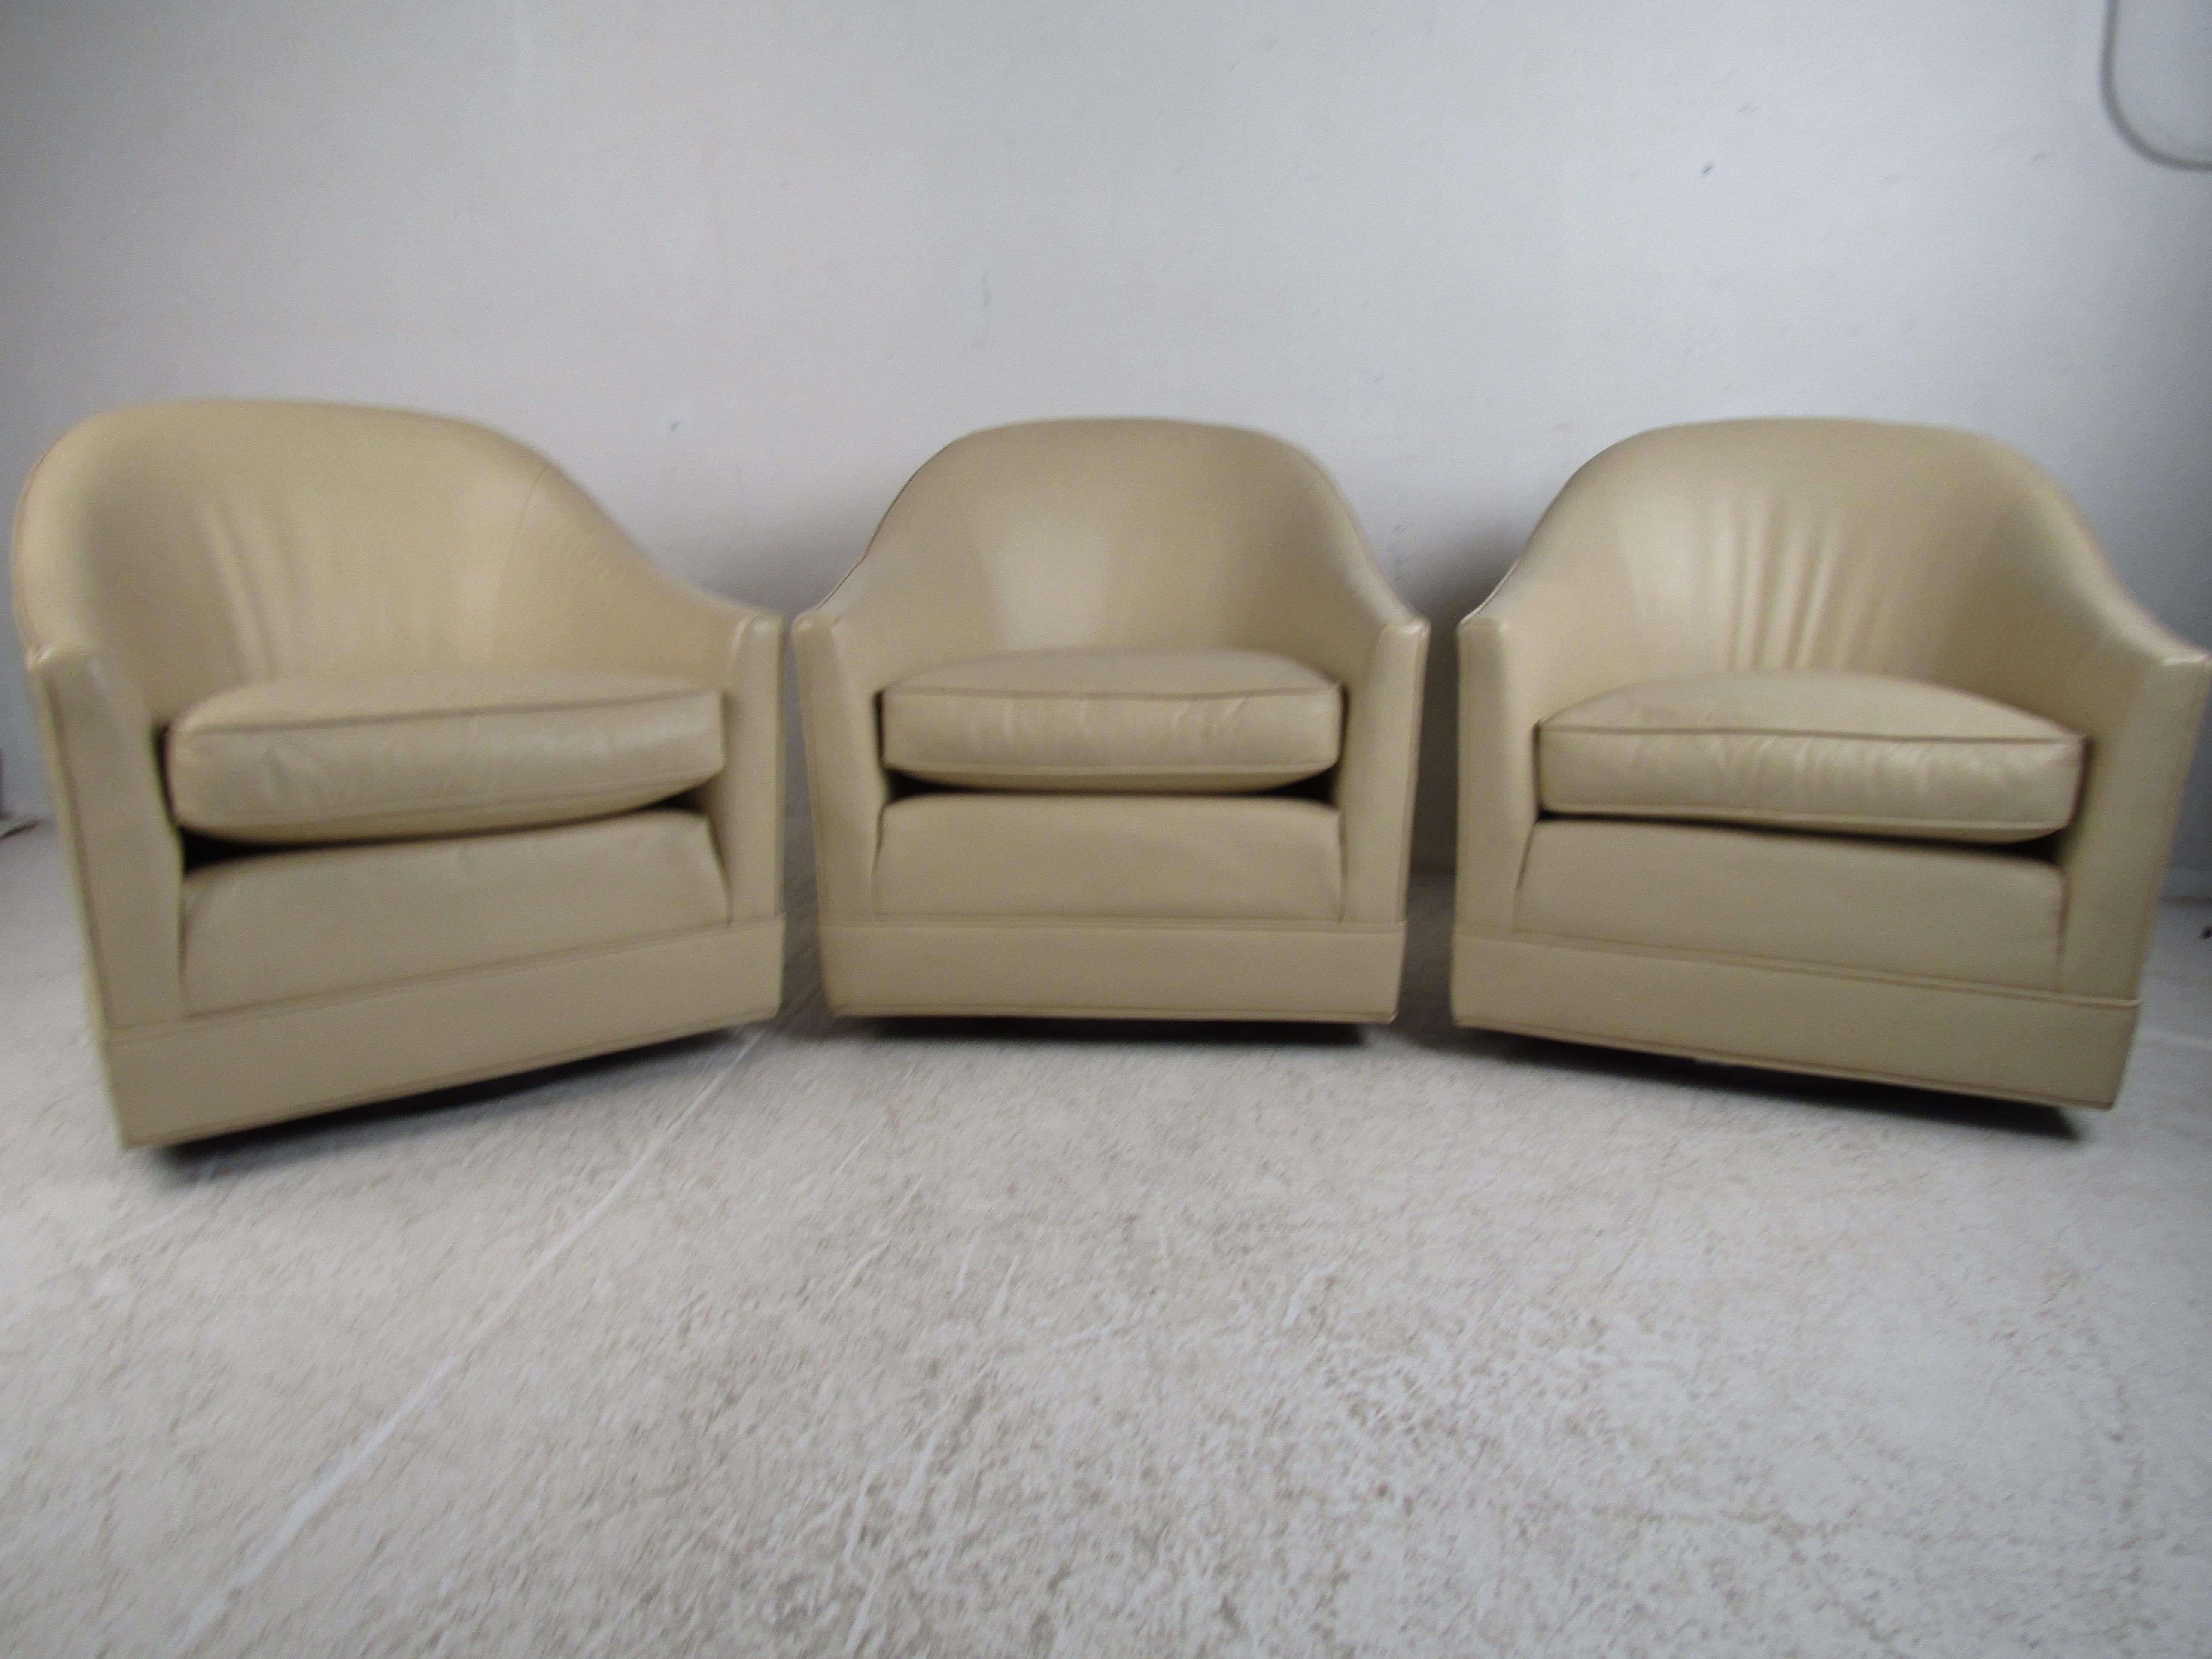 Set of 3 Vintage Modern Harvey Probber Chairs In Good Condition For Sale In Brooklyn, NY